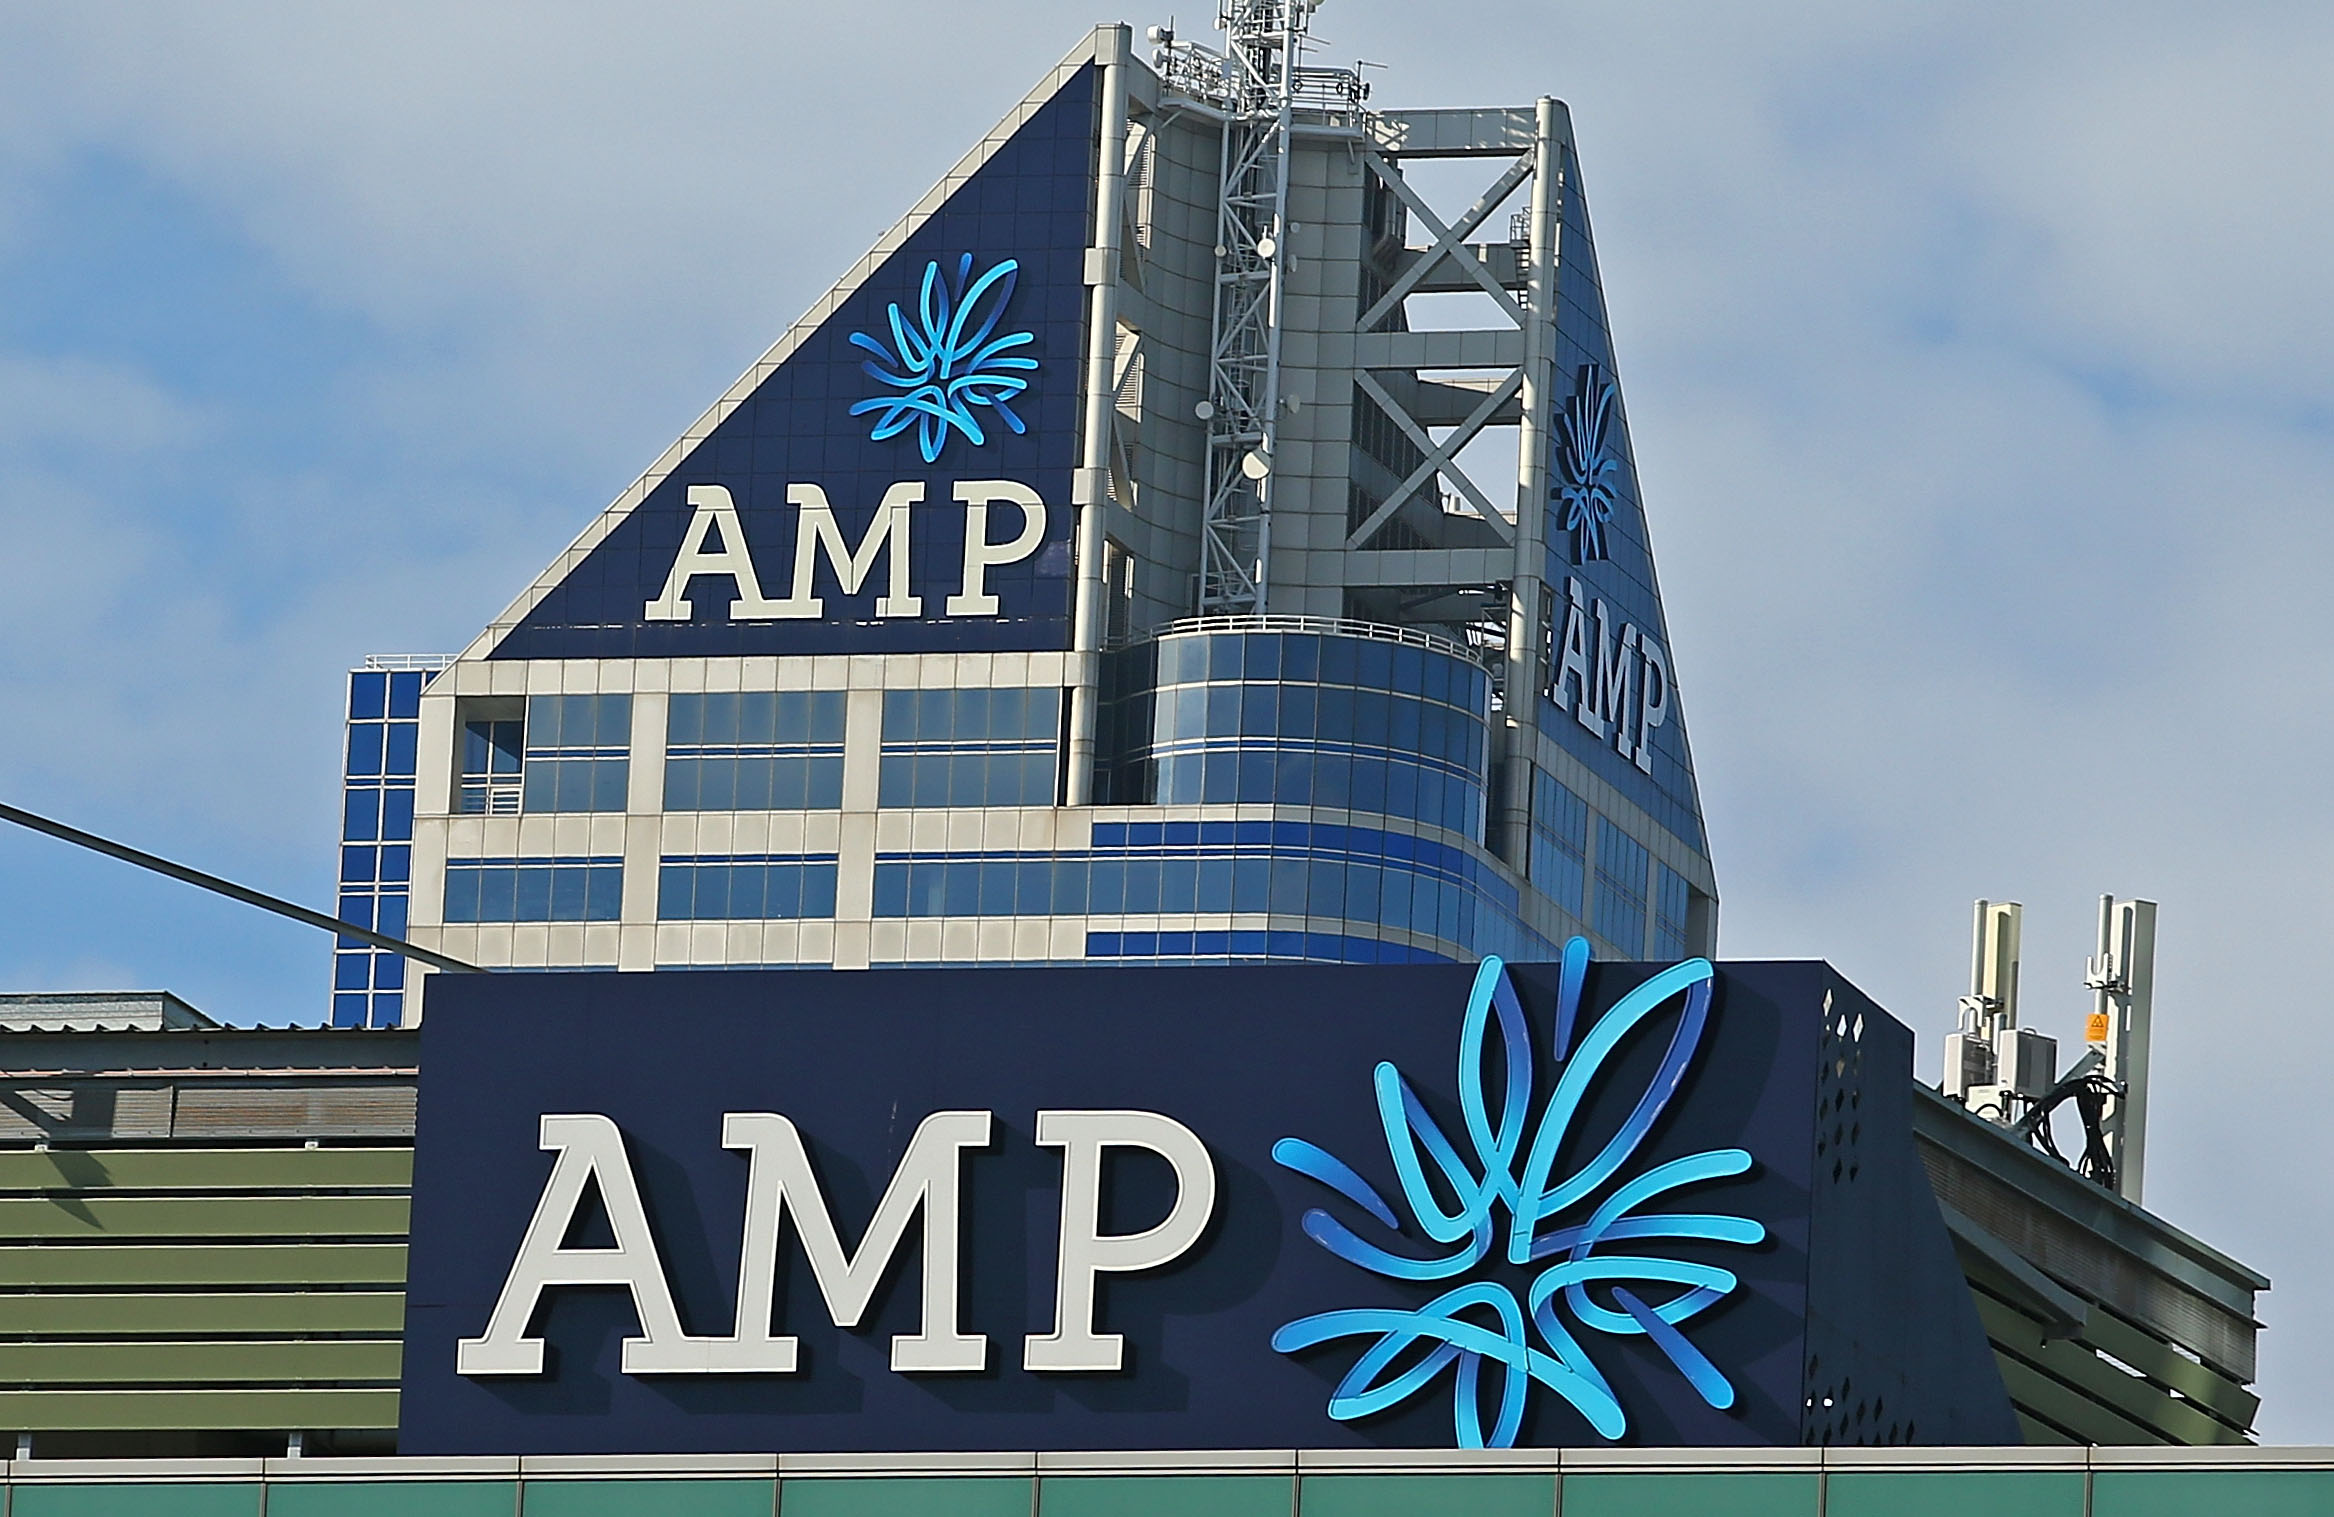 AMP is the latest Australian company to fall foul of a Royal Commission into banking and...